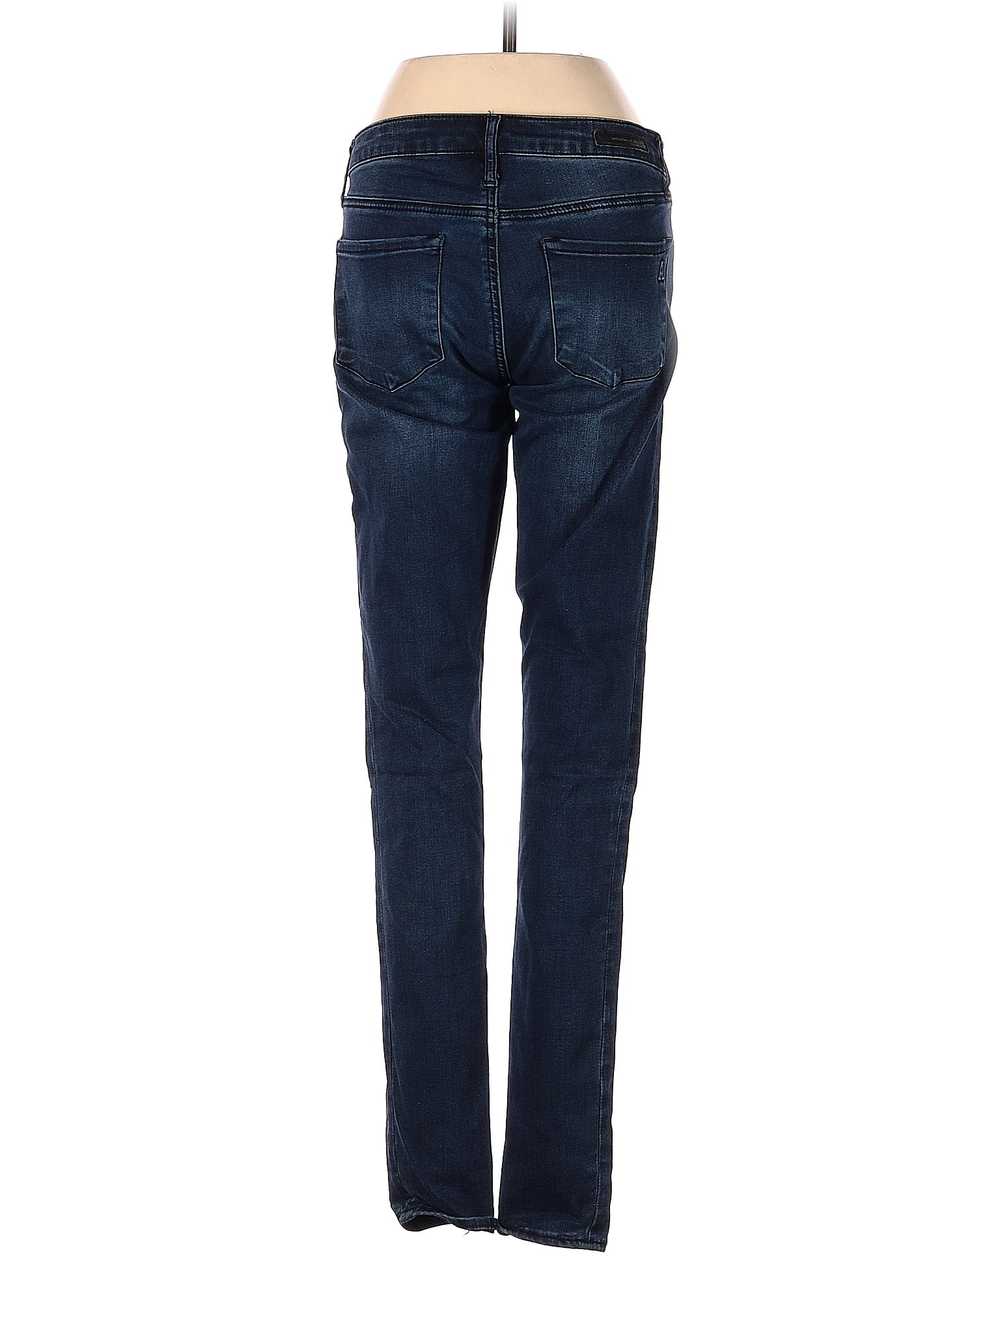 Articles of Society Women Blue Jeans 25W - image 2